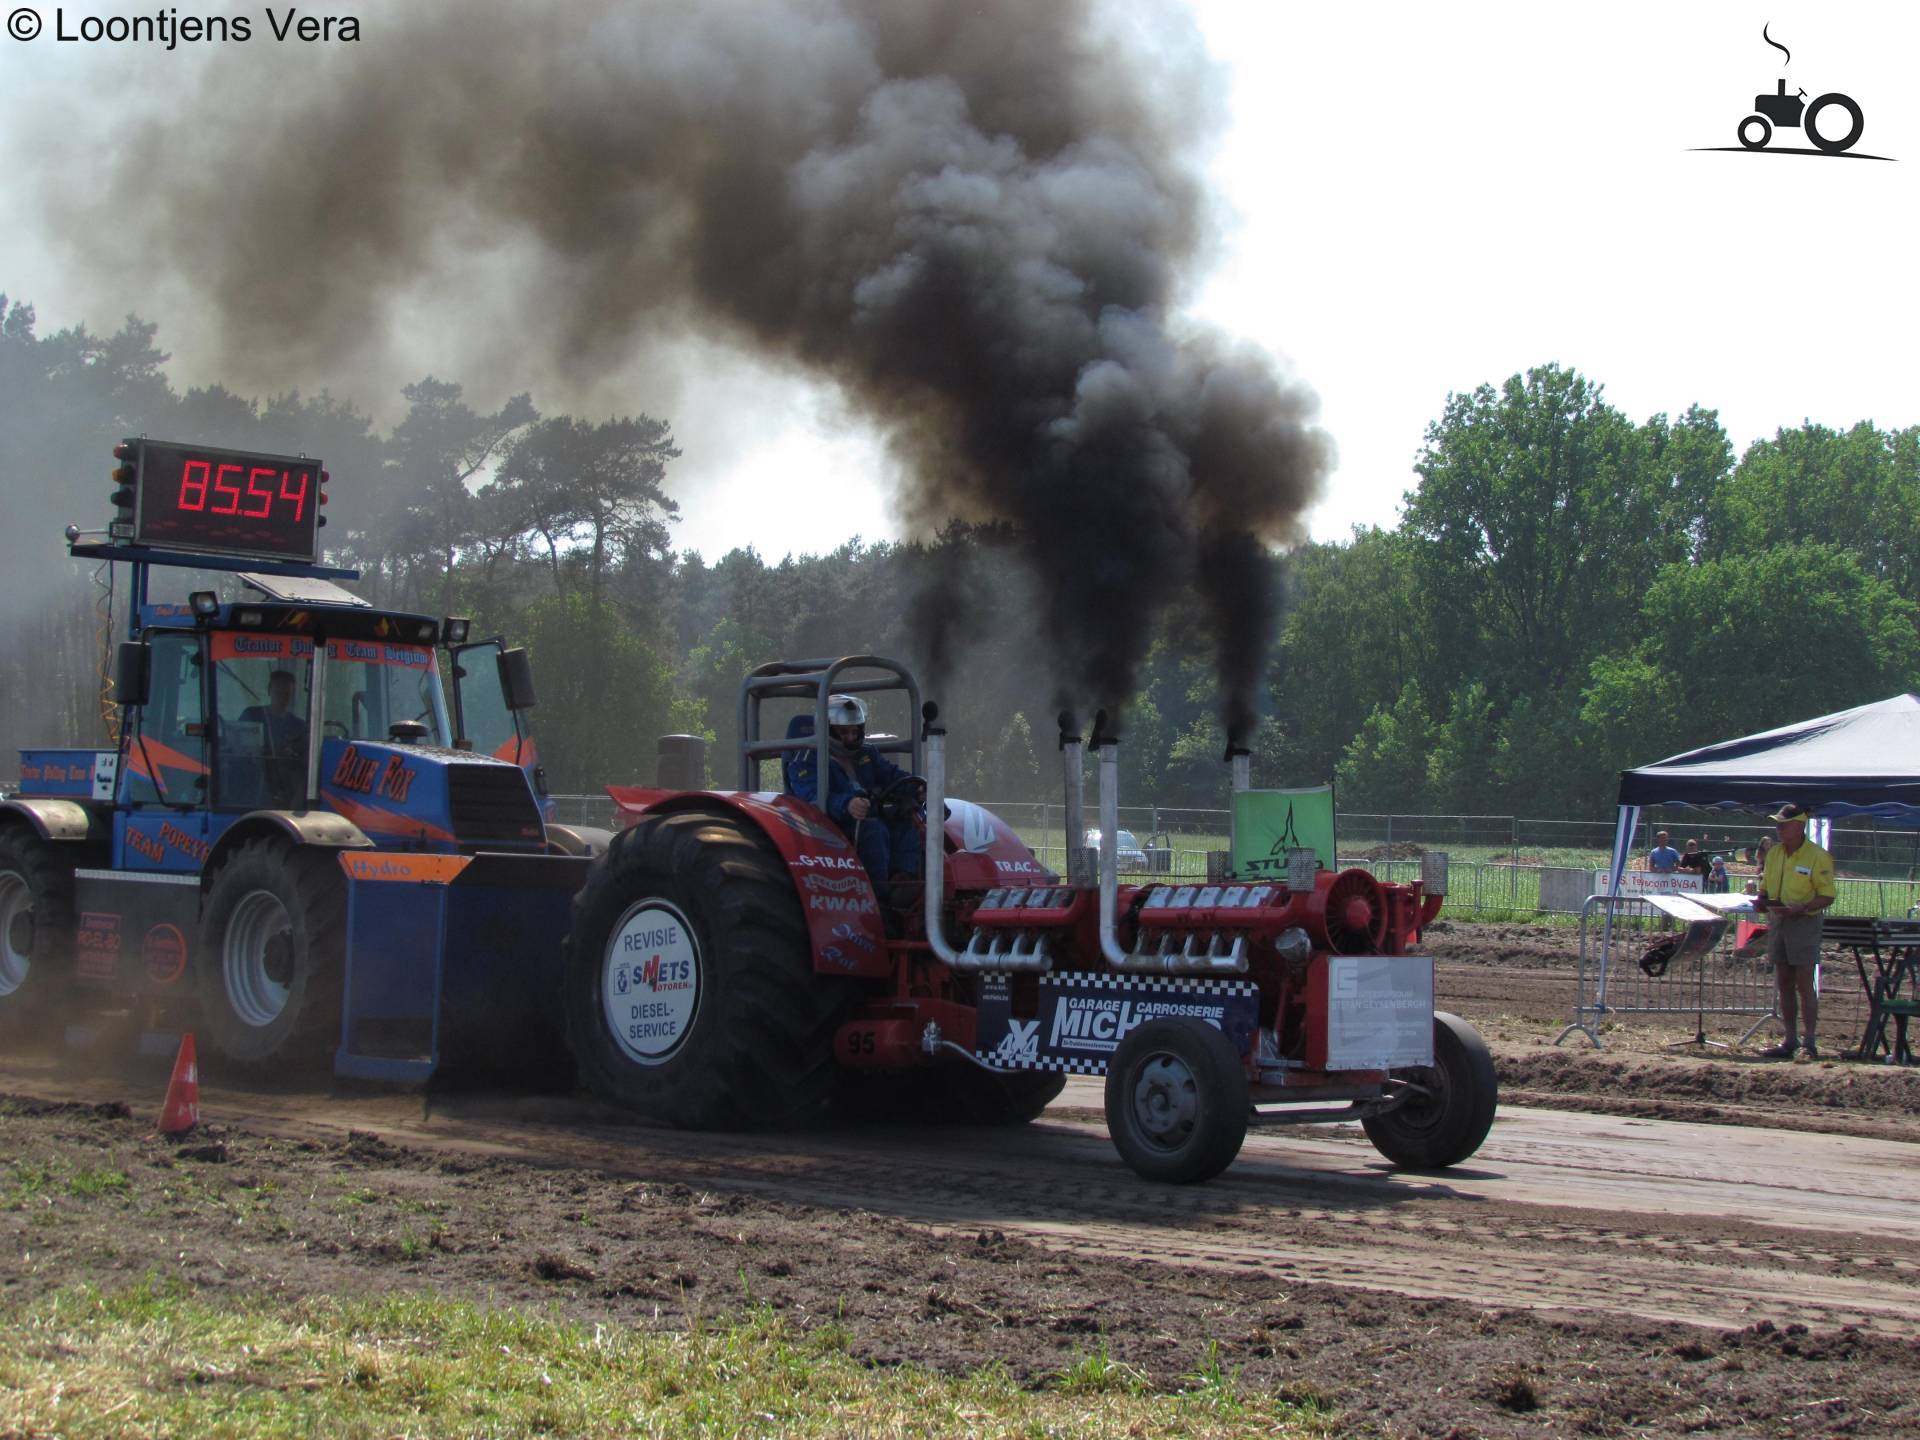 tractor pulling Tractorpulling